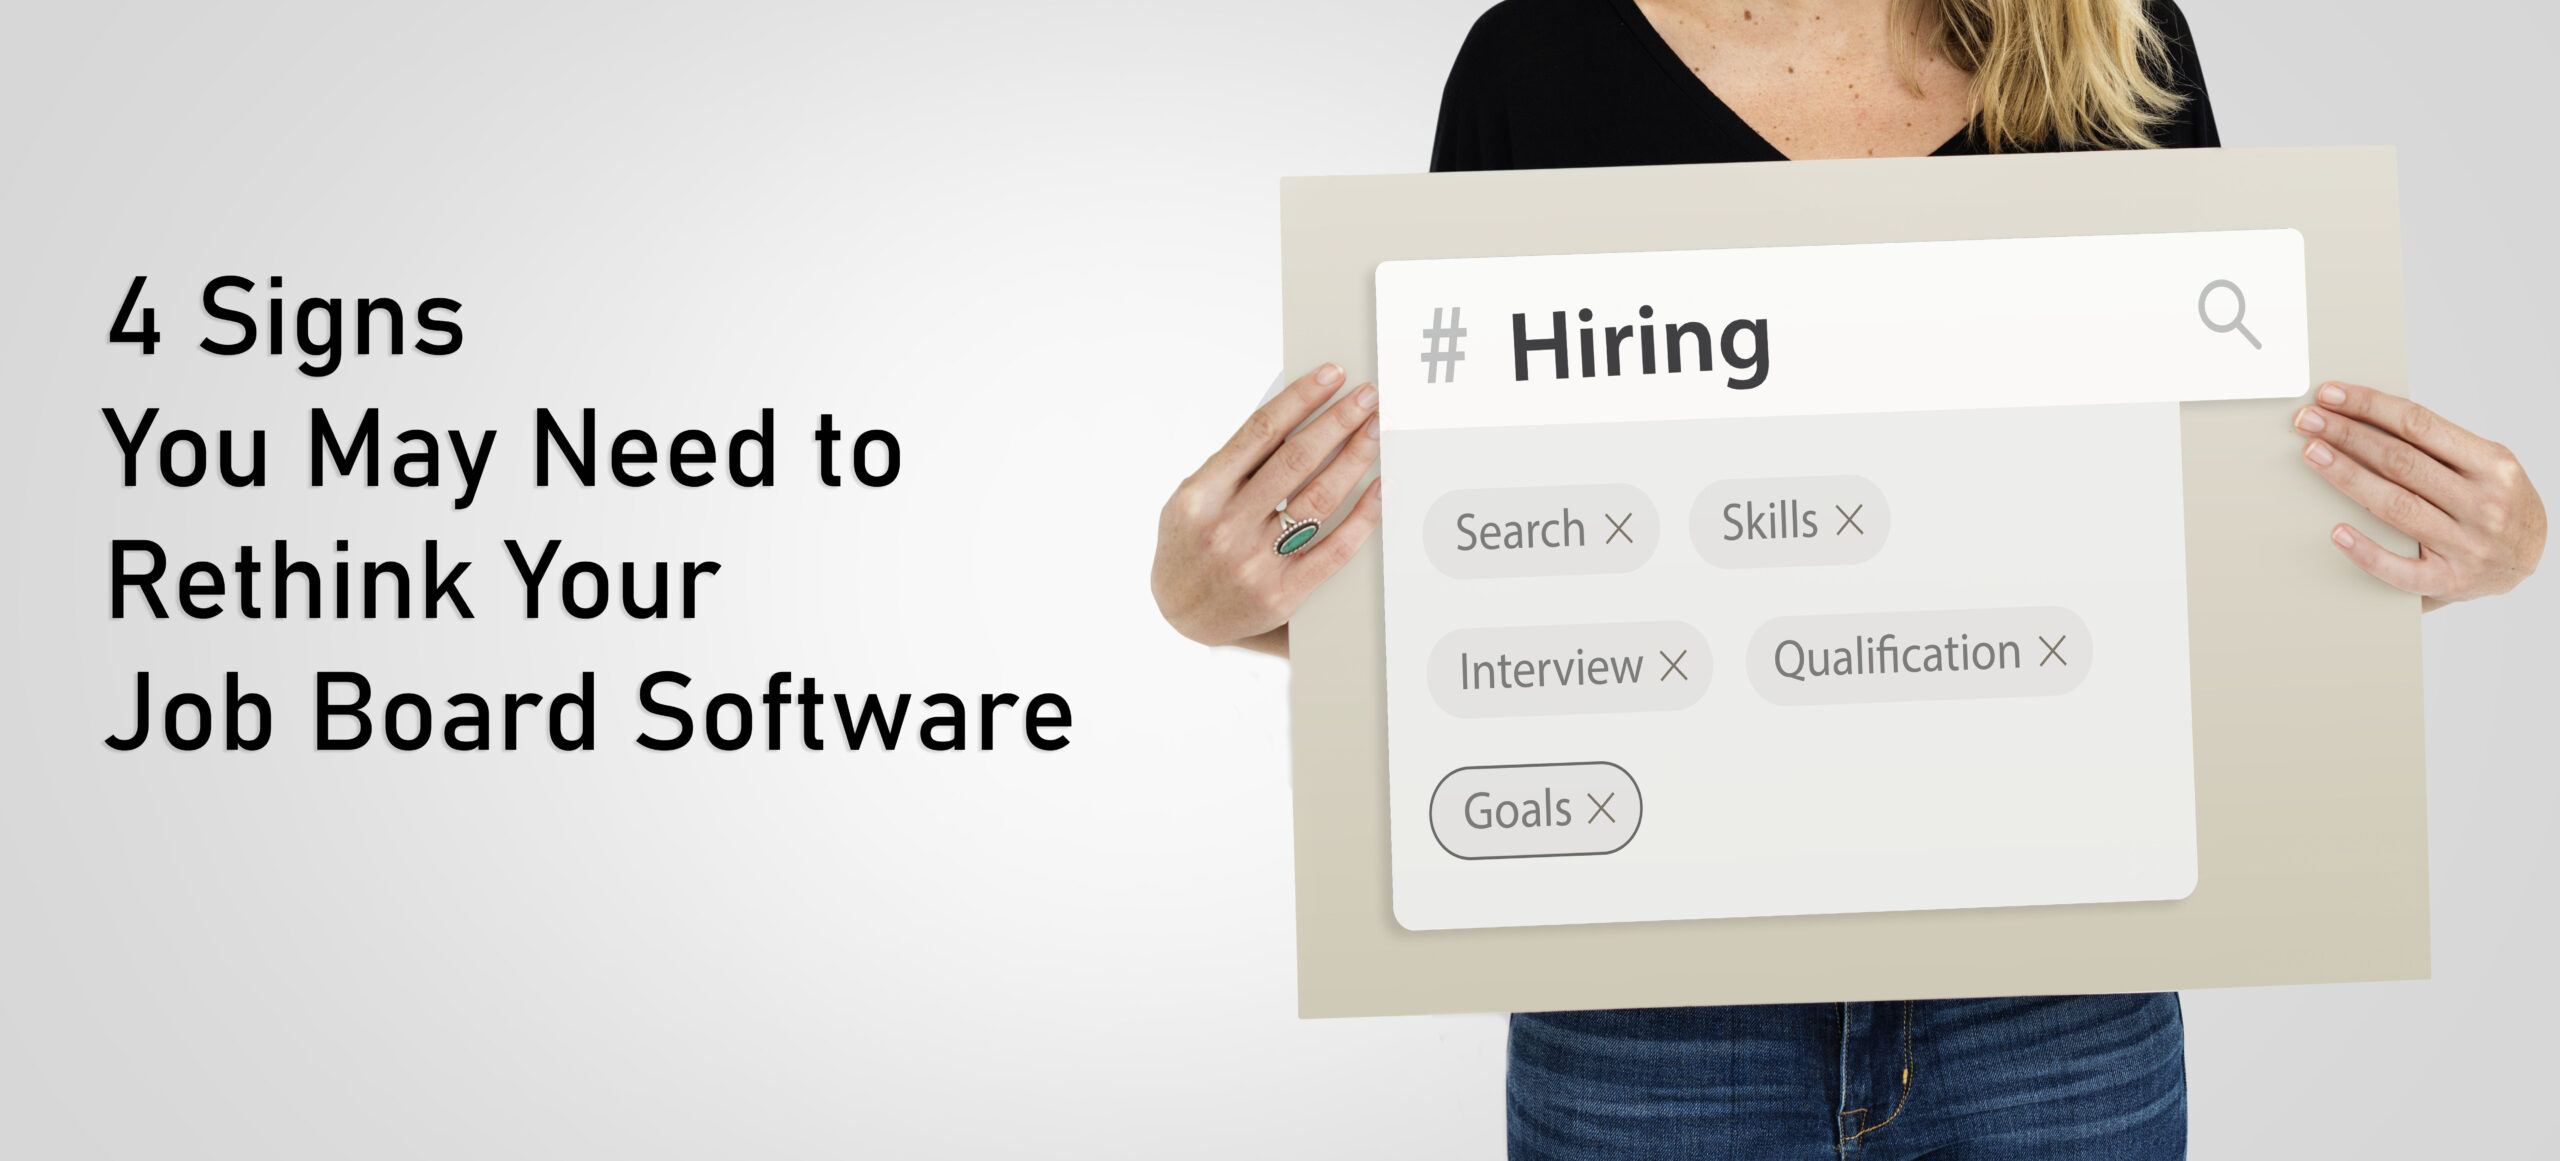 4 Signs You May Need to Rethink Your Job Board Software